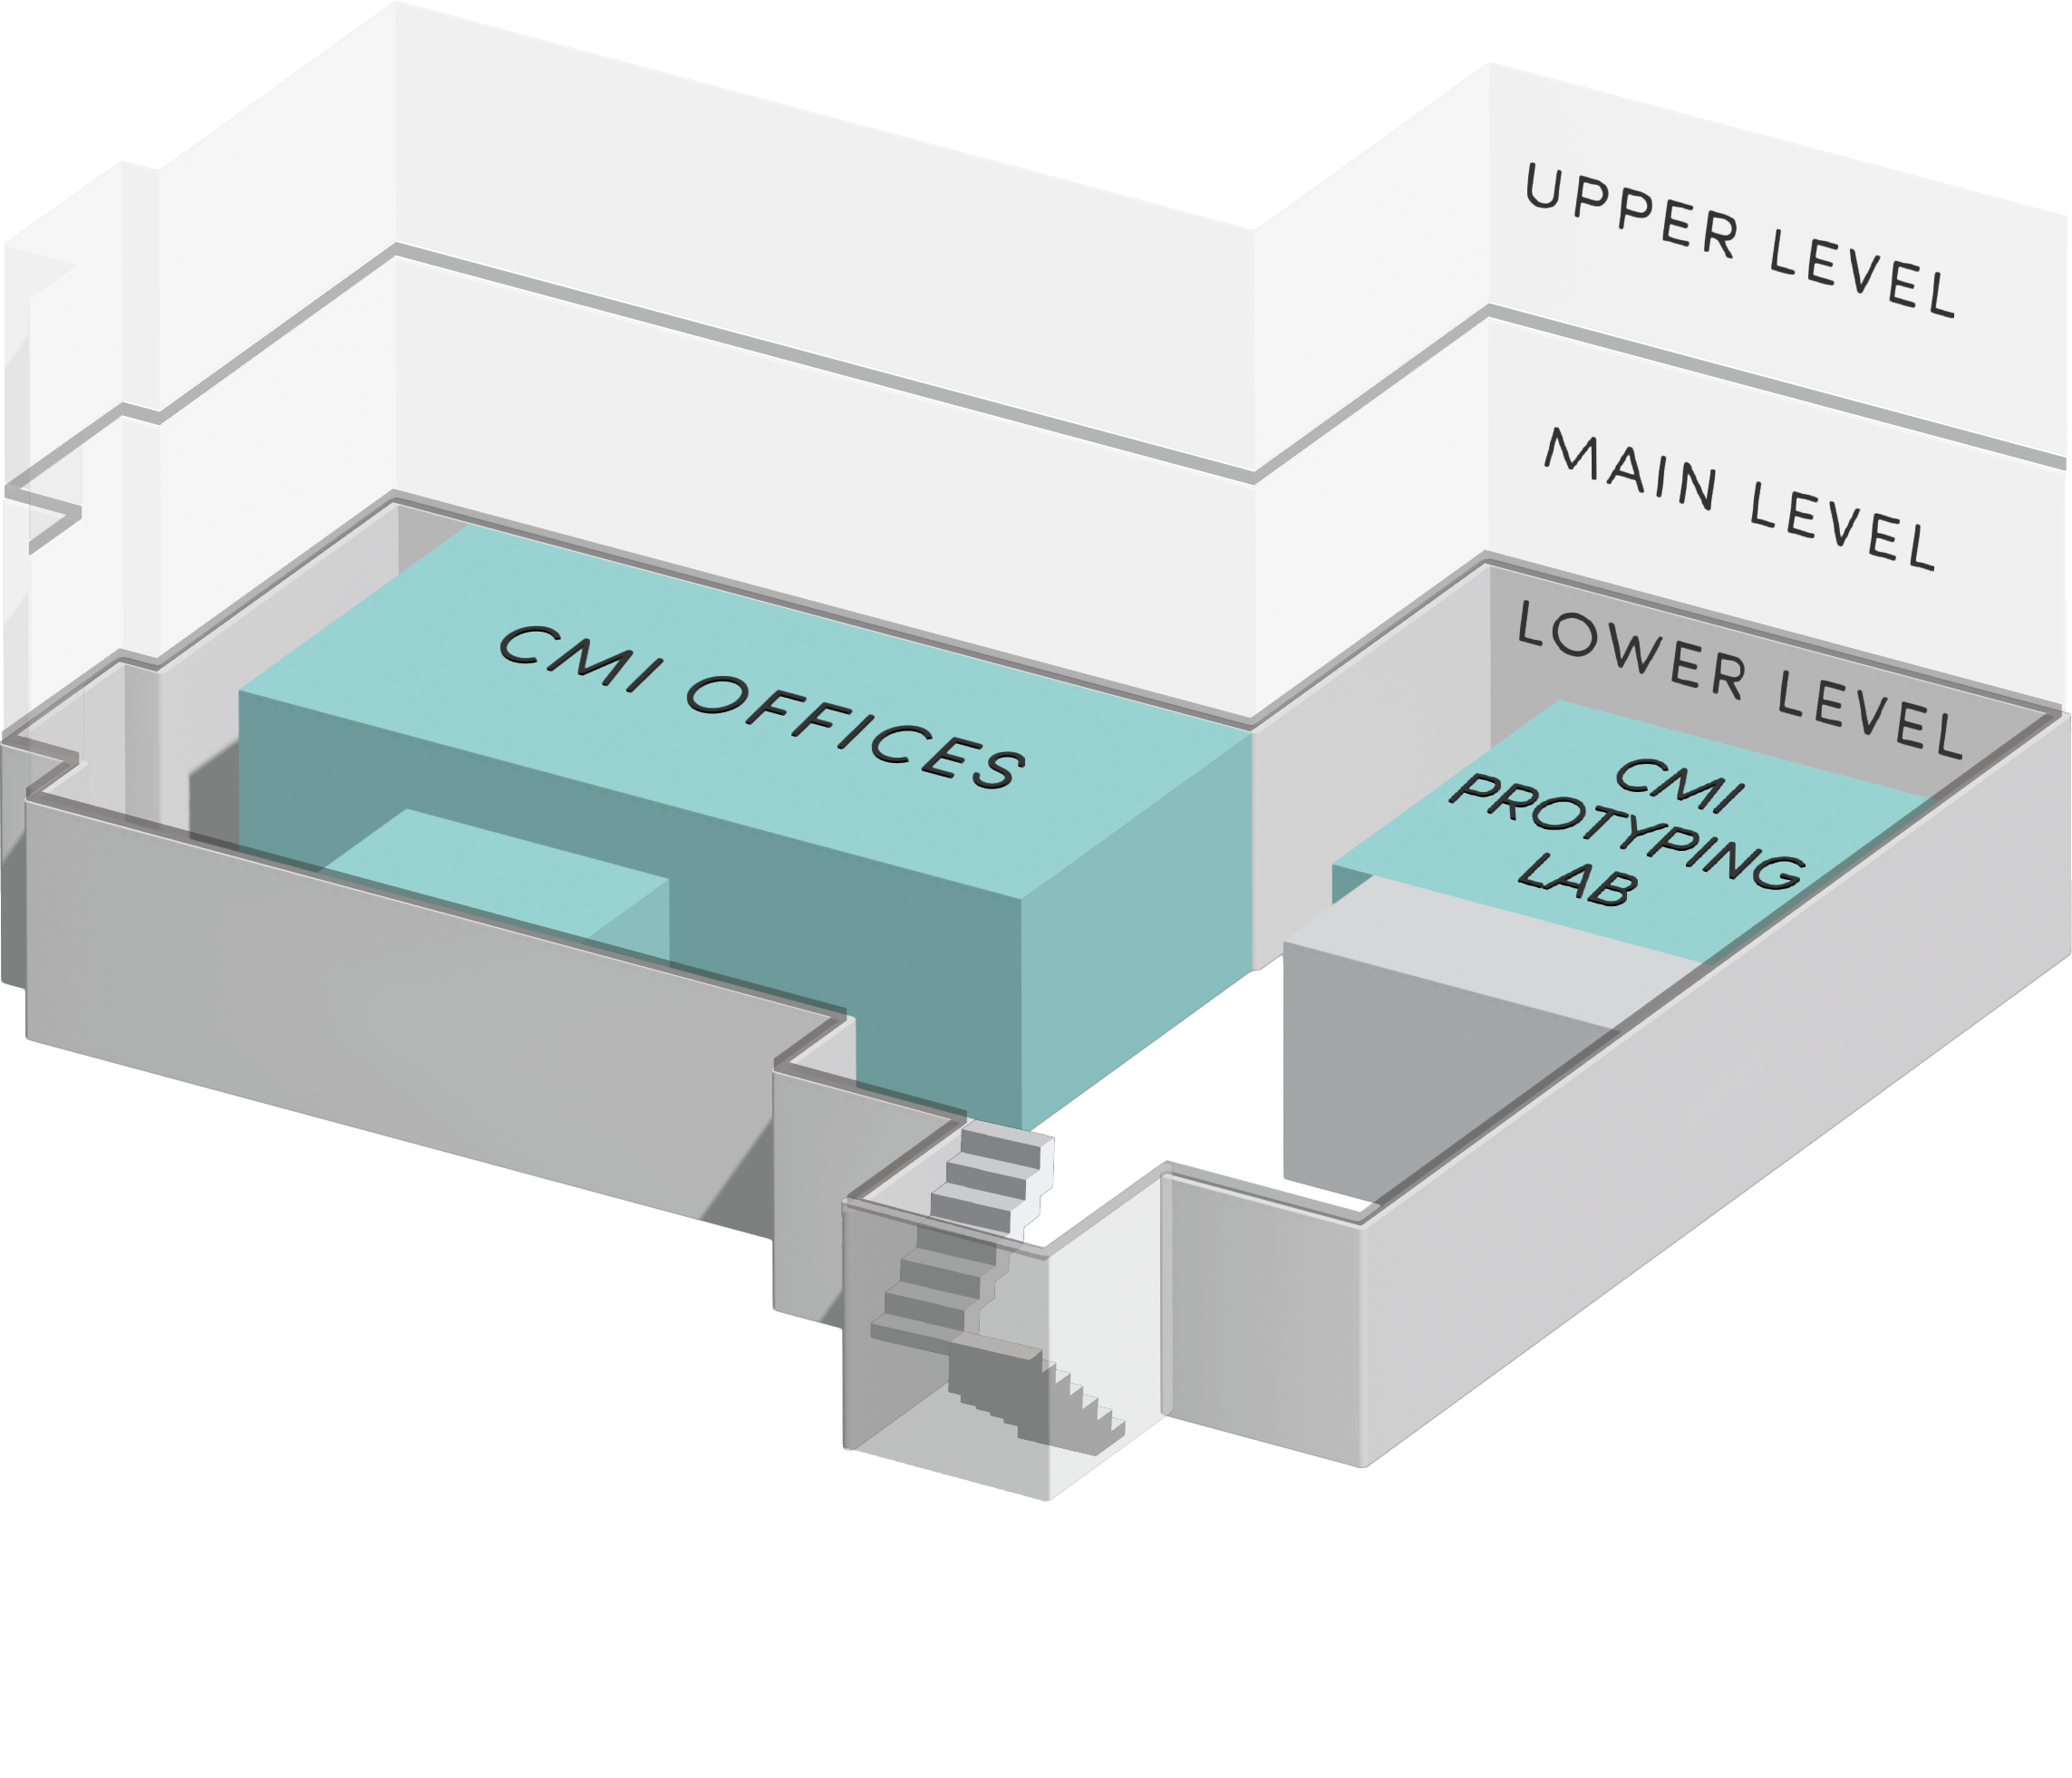 3D Layout of EHSL building showing CMI on lower level